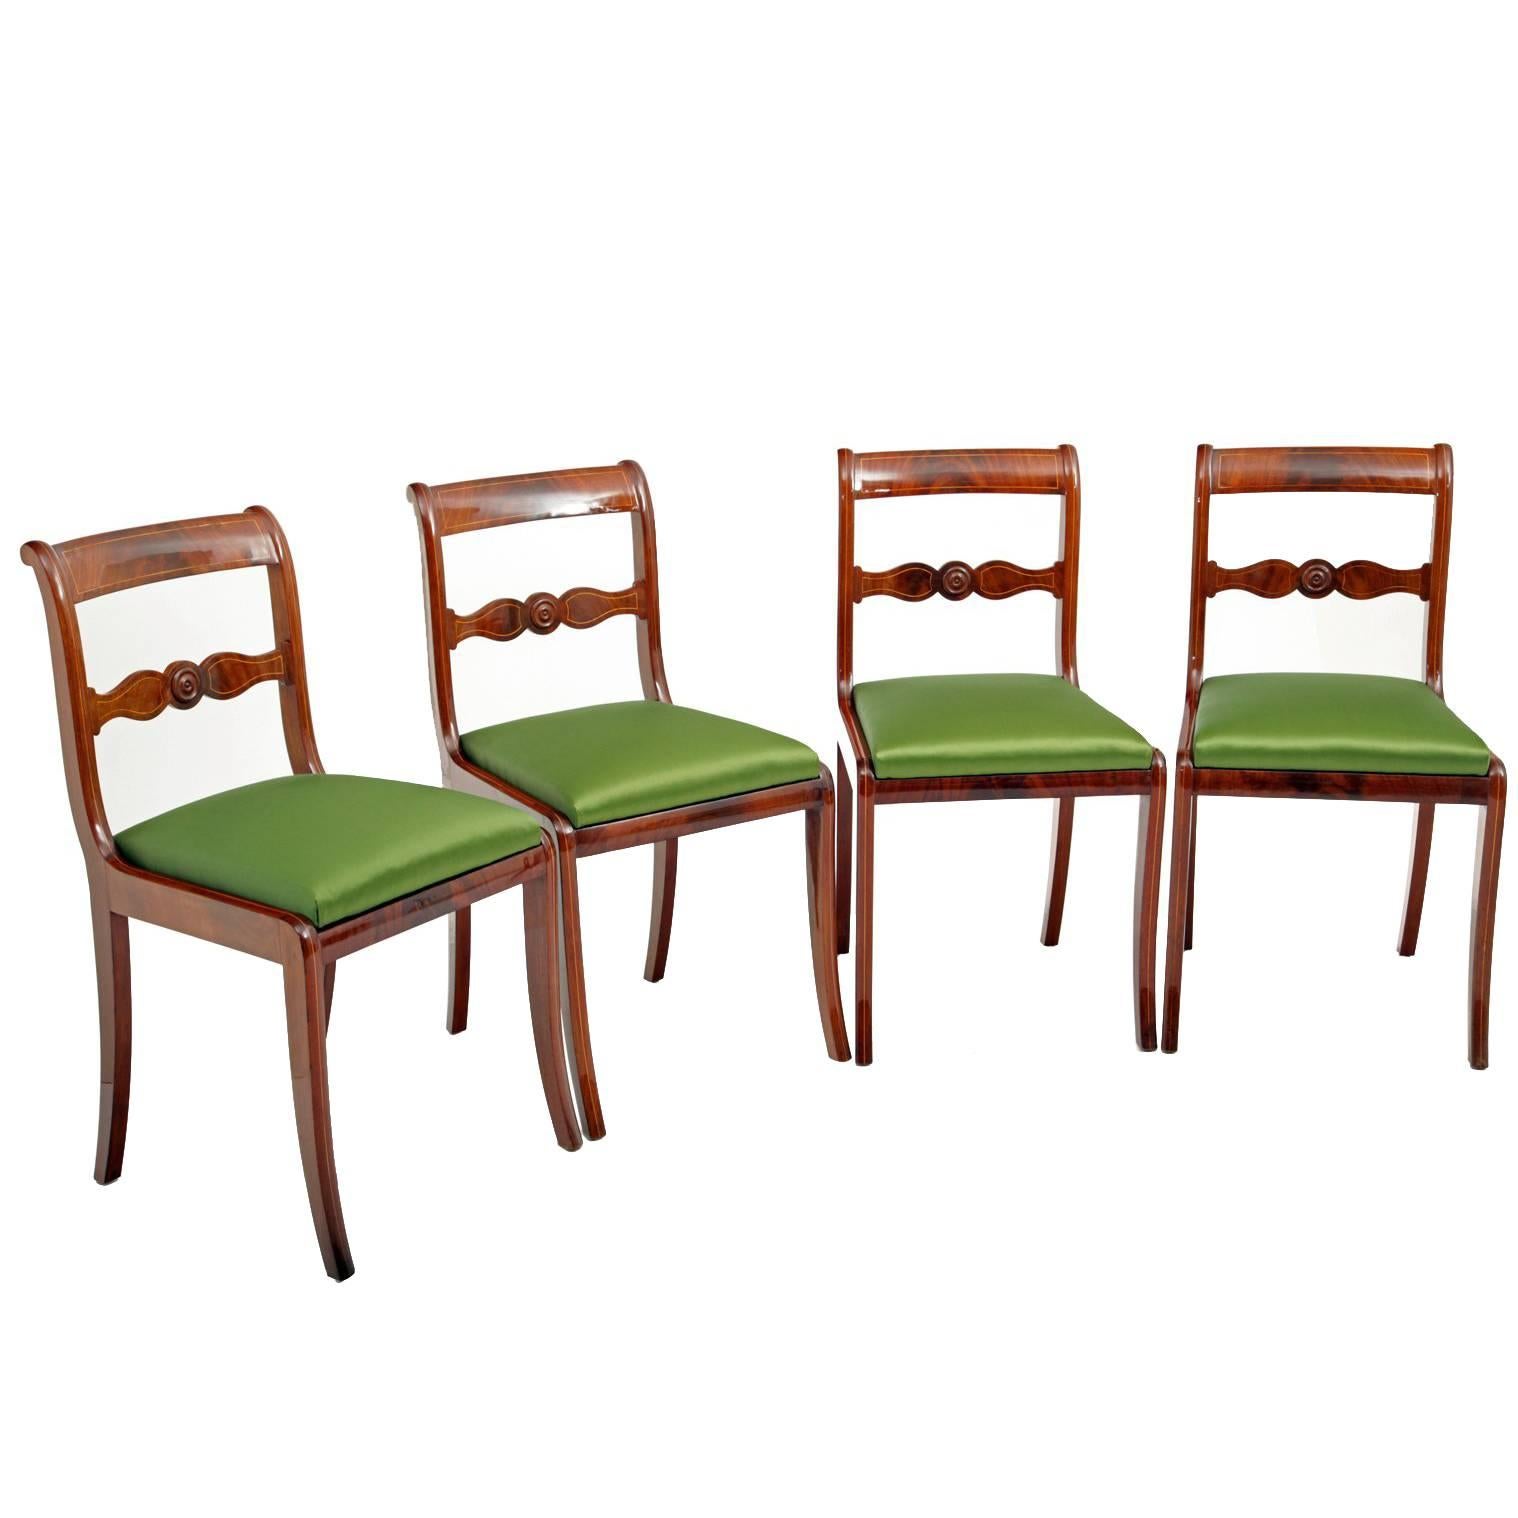 Dining Chairs, Central, Germany, circa 1830